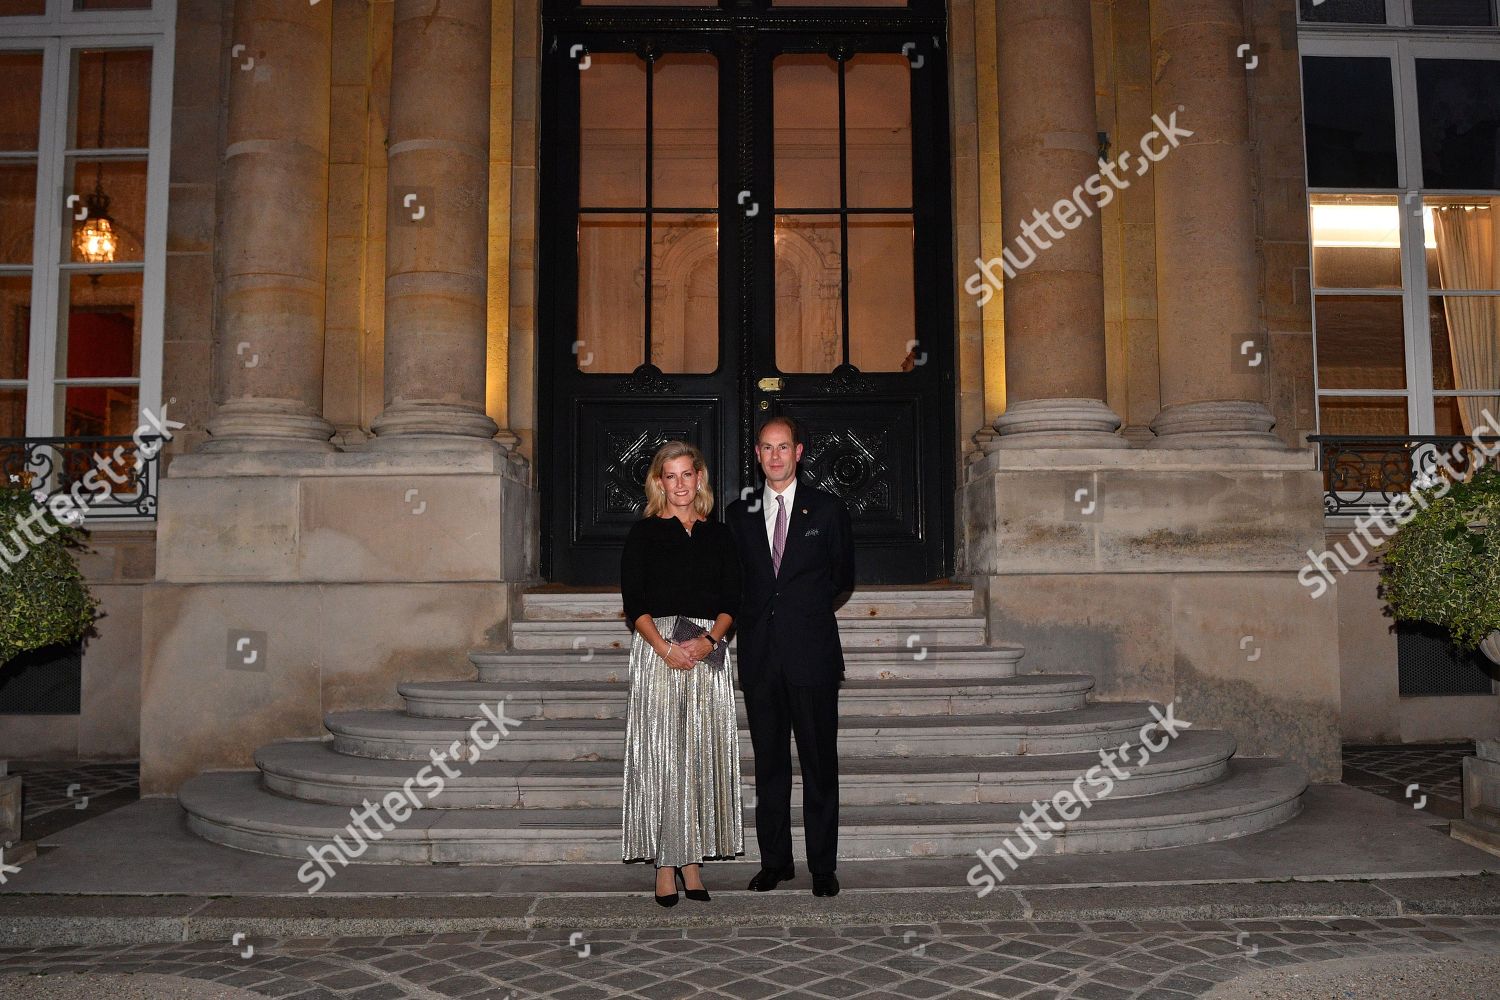 prince-edward-and-sophie-countess-of-wessex-visit-to-france-shutterstock-editorial-9907868au.jpg